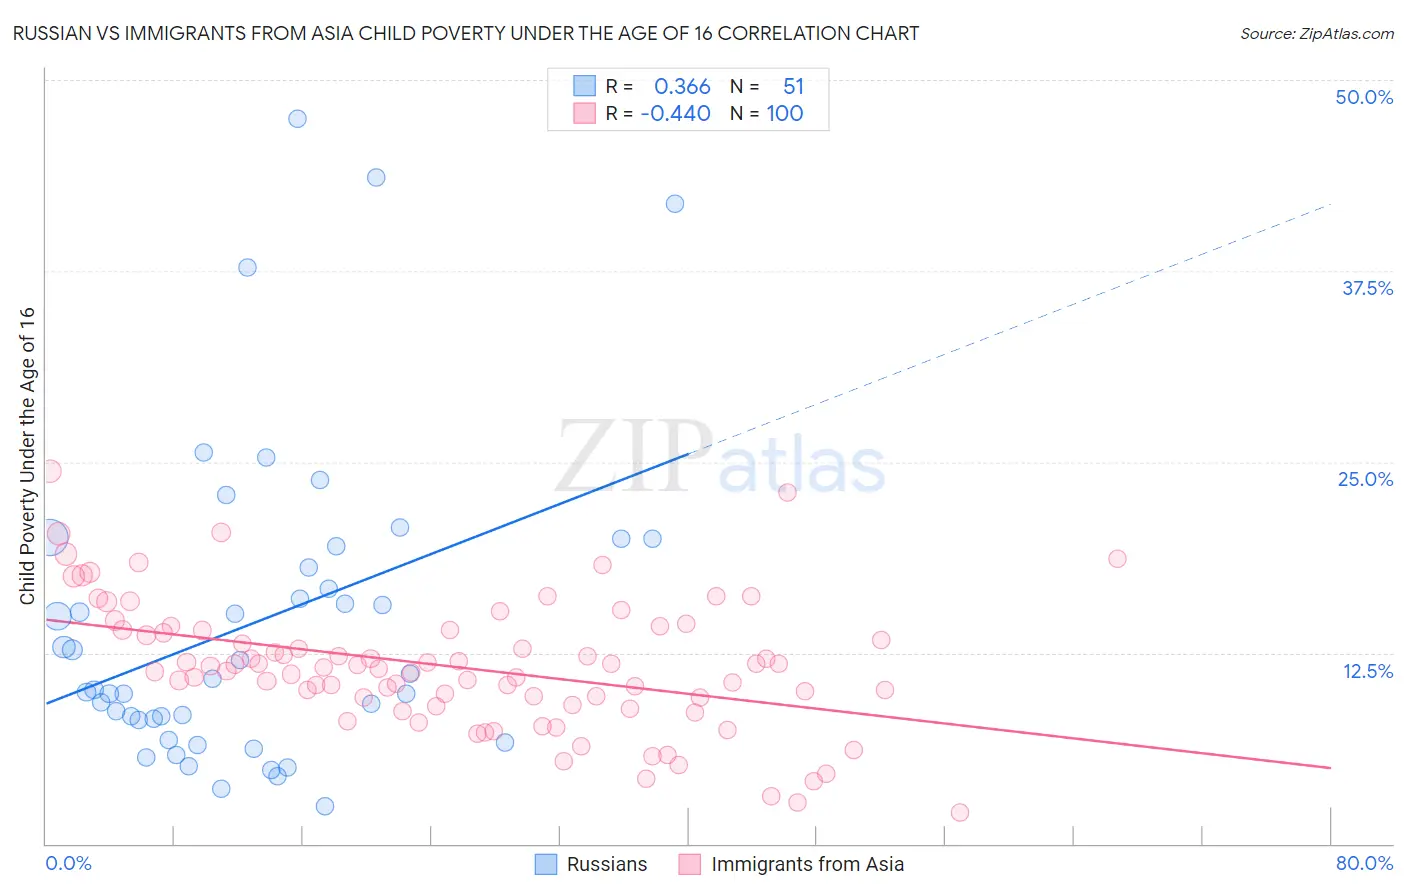 Russian vs Immigrants from Asia Child Poverty Under the Age of 16